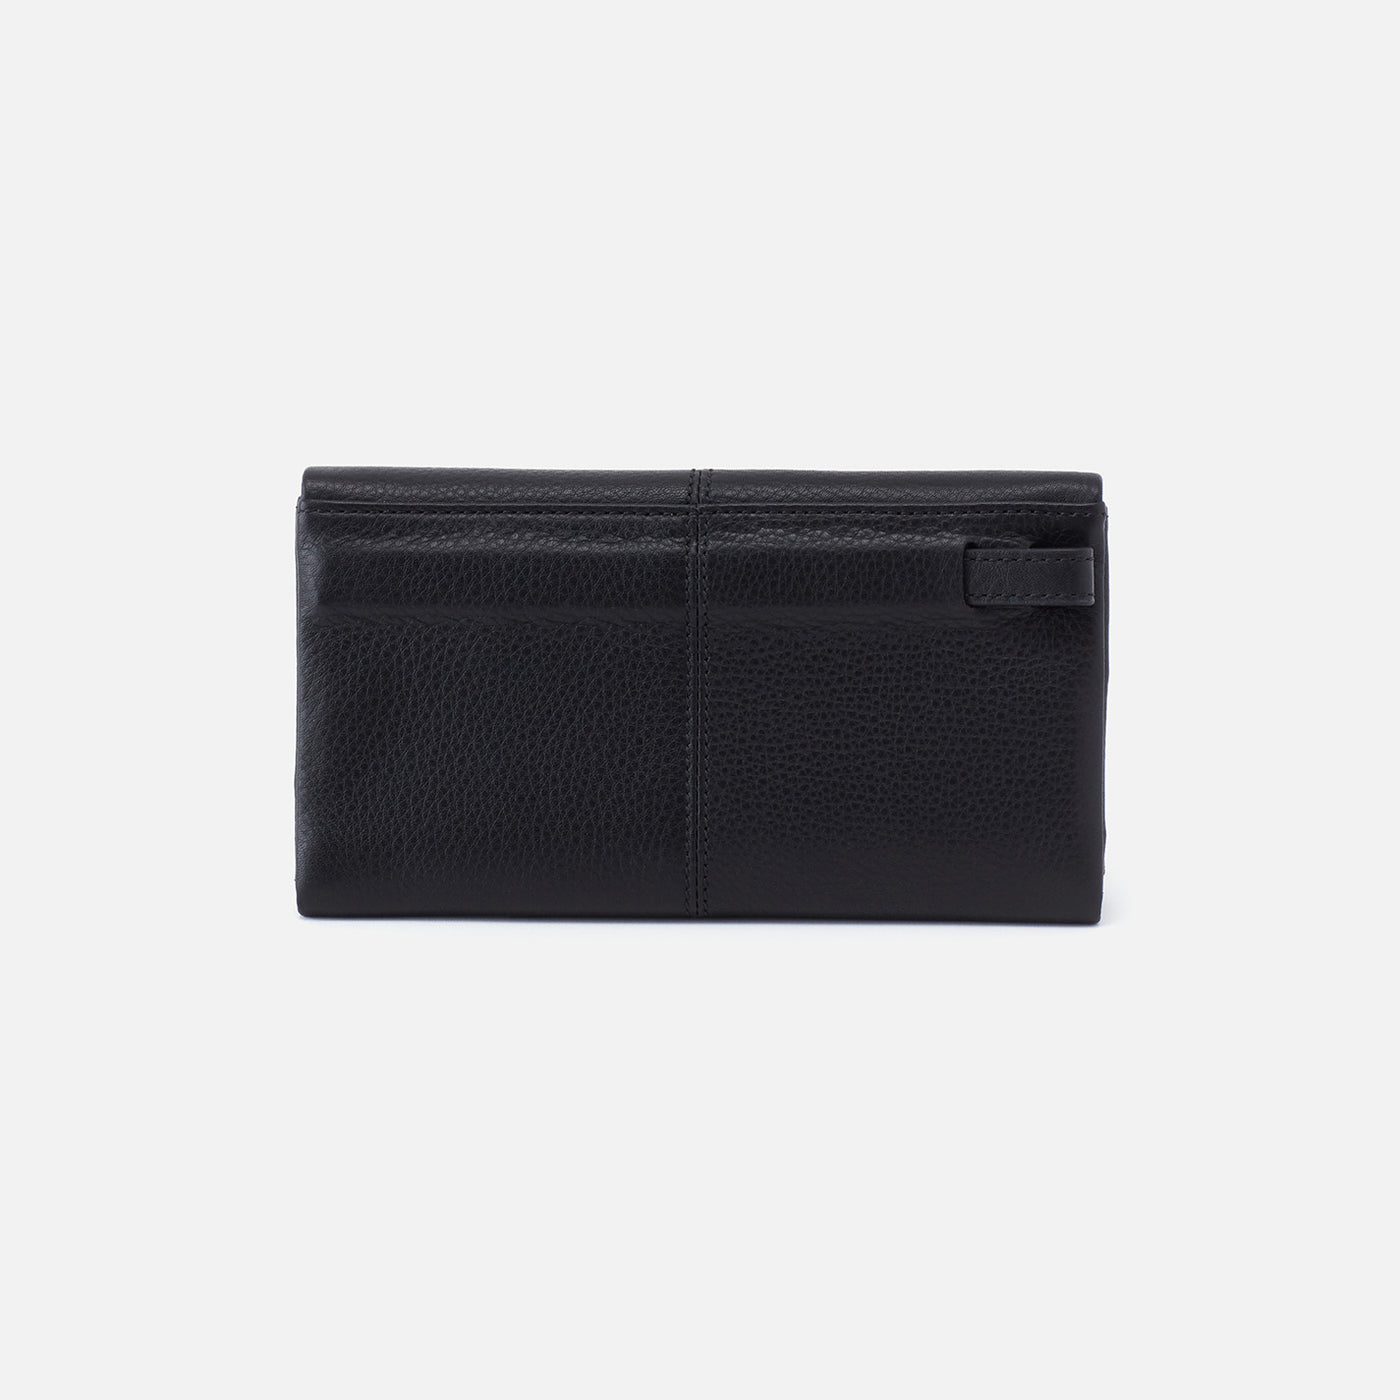 Keen Continental Wallet in Pebbled Leather - Black